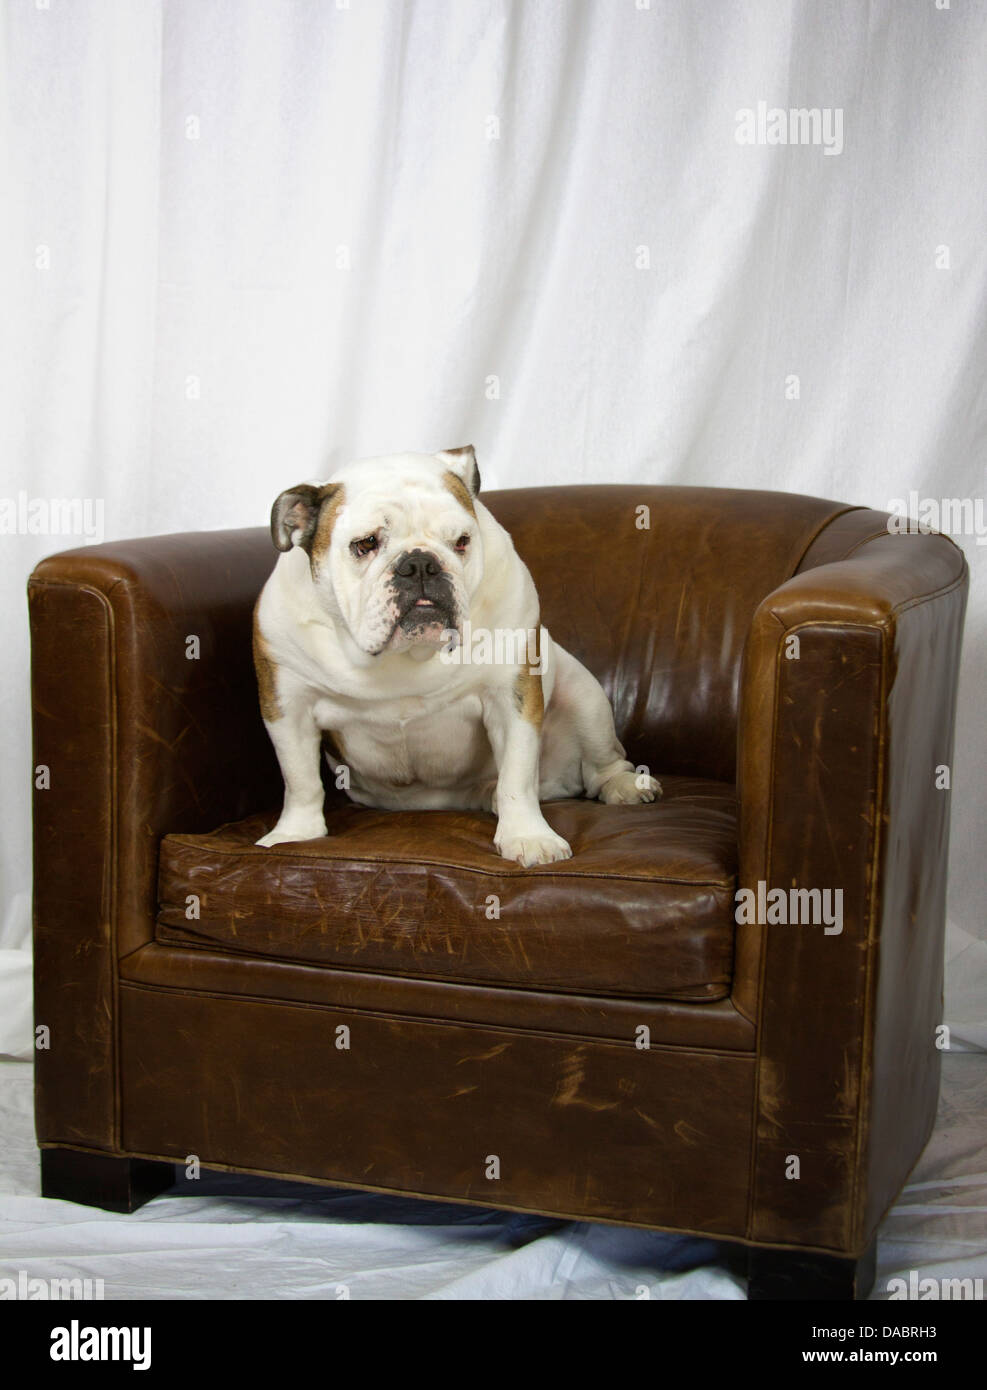 English Bulldog sitting on a leather chair looking pretty Stock Photo